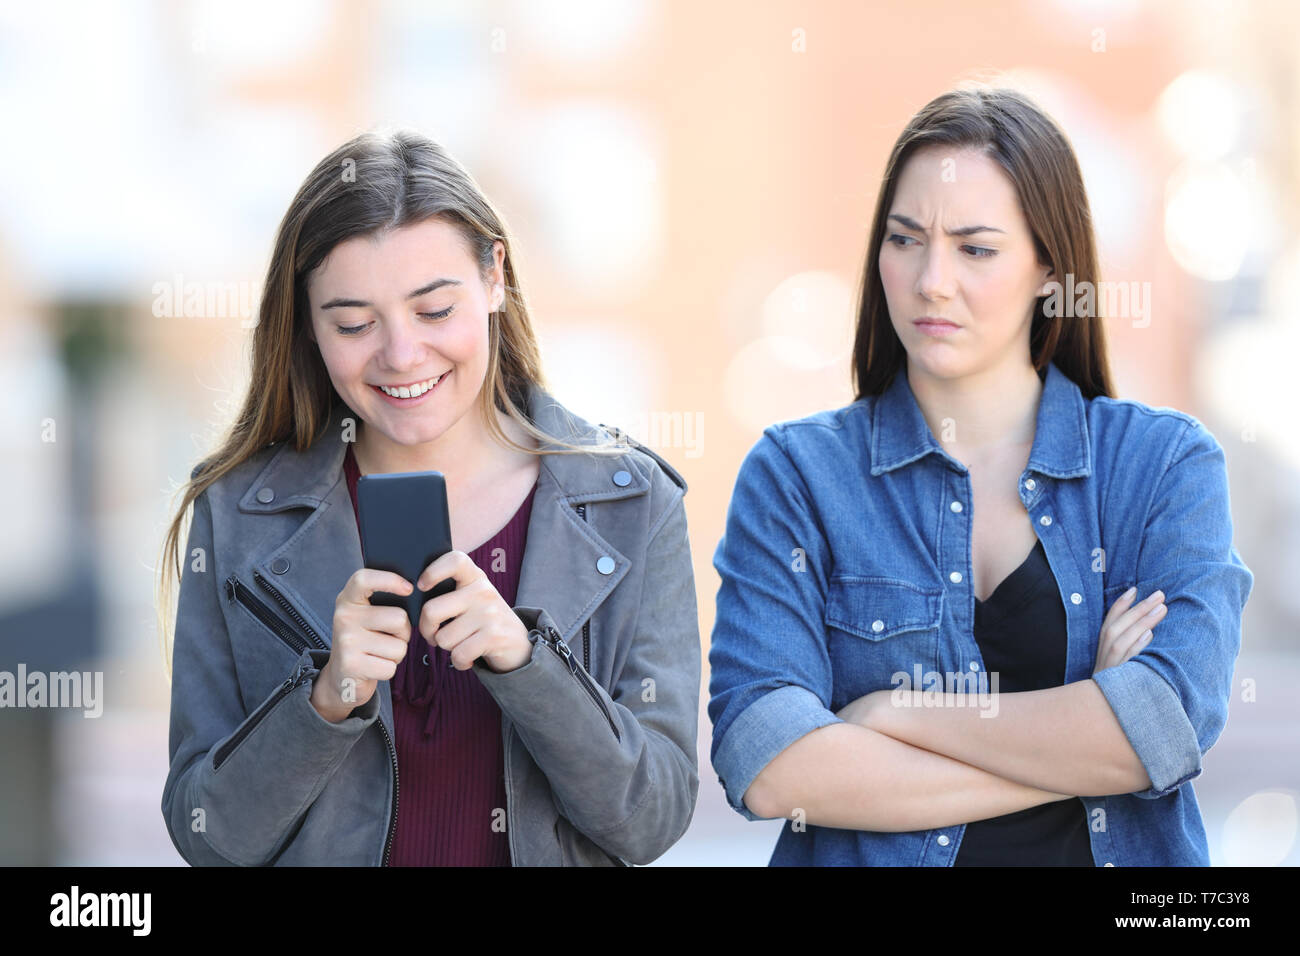 Front view portrait of an angry woman with her friend who is using phone in the street Stock Photo